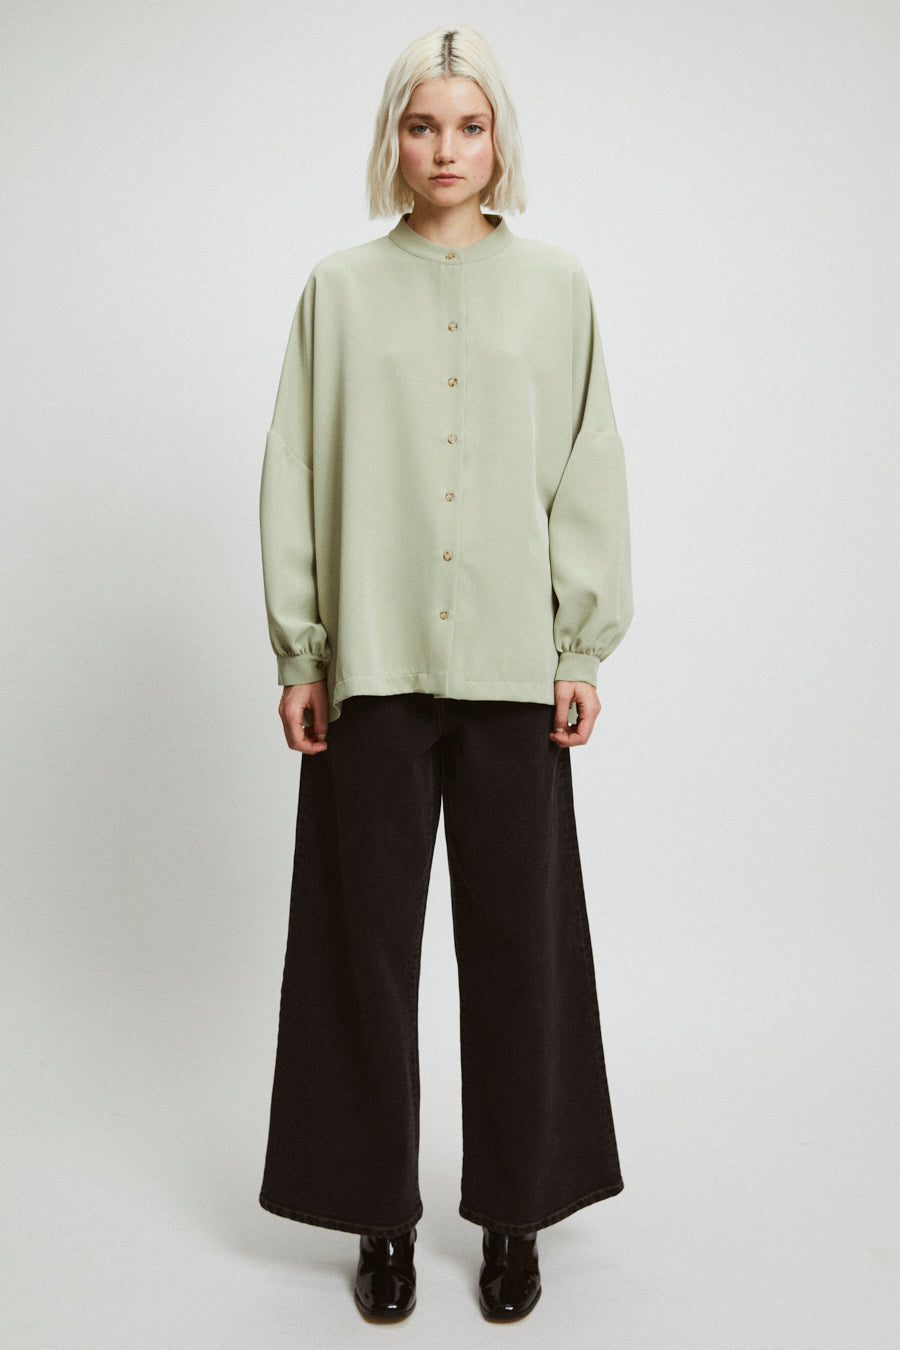 oversize miller top by rita row / A simple button-down, oversize shirt with XXL balloon sleeves & a mock neck. Available in Black or Dirty green. Ethically made in Portugal